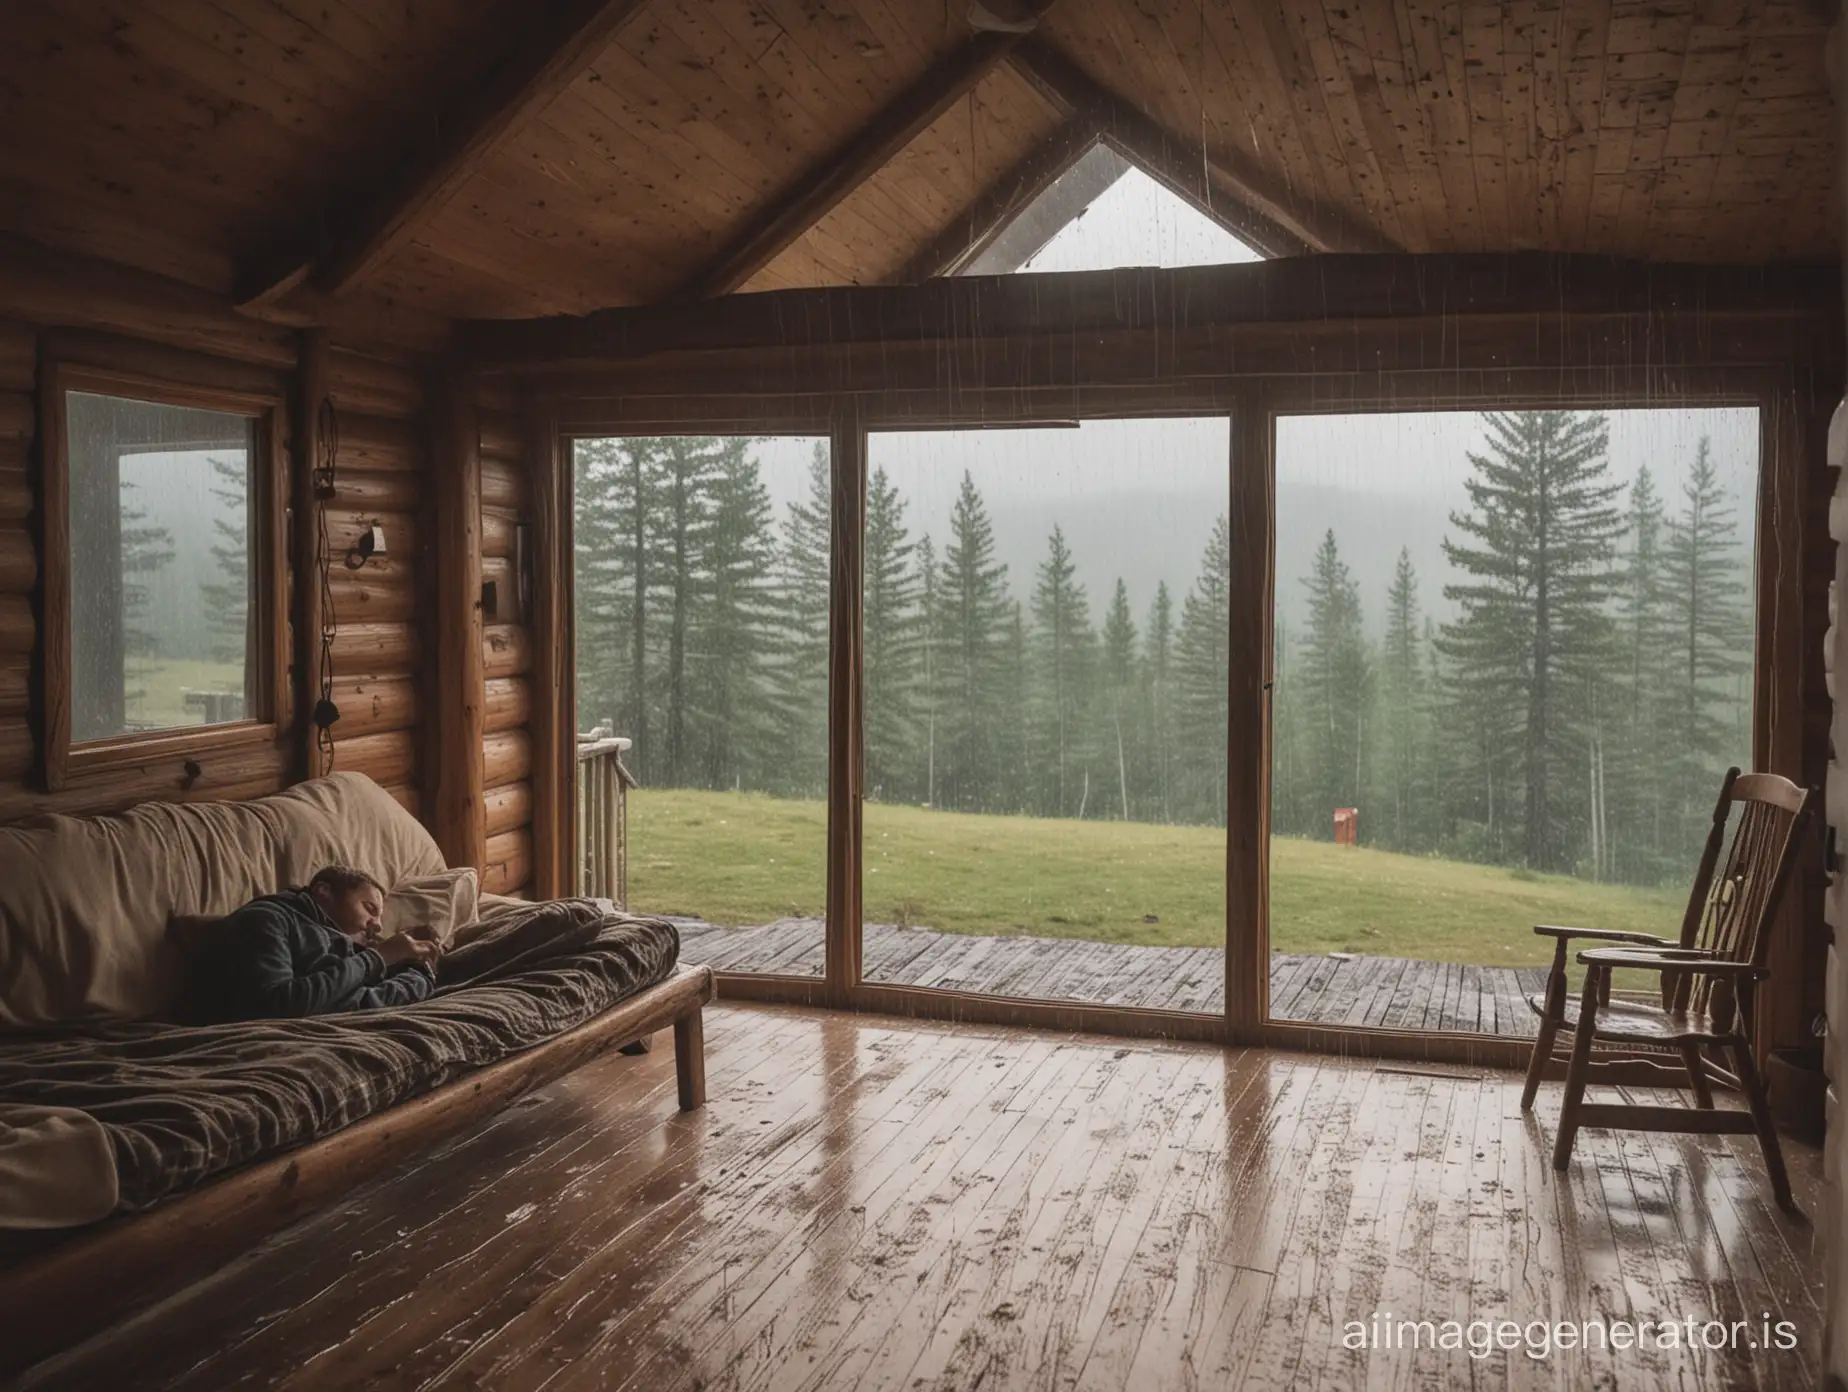 sitting inside a cabin while its raining outside